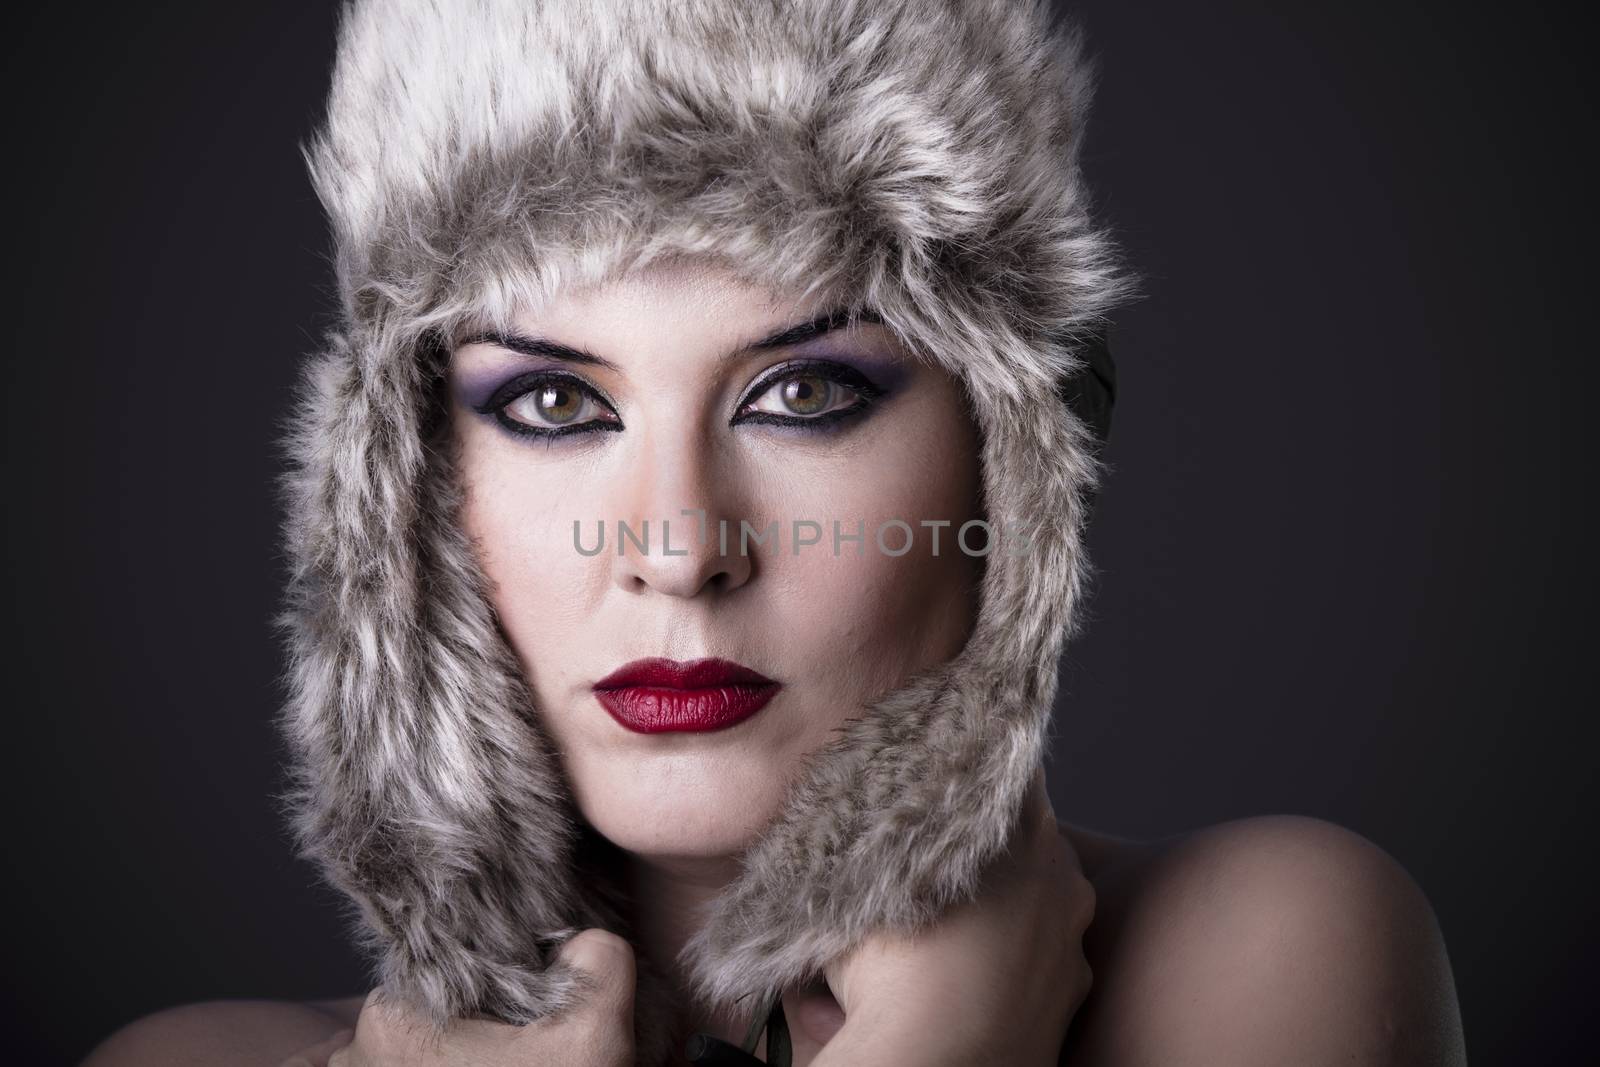 Russian Girl with hat on a dark background